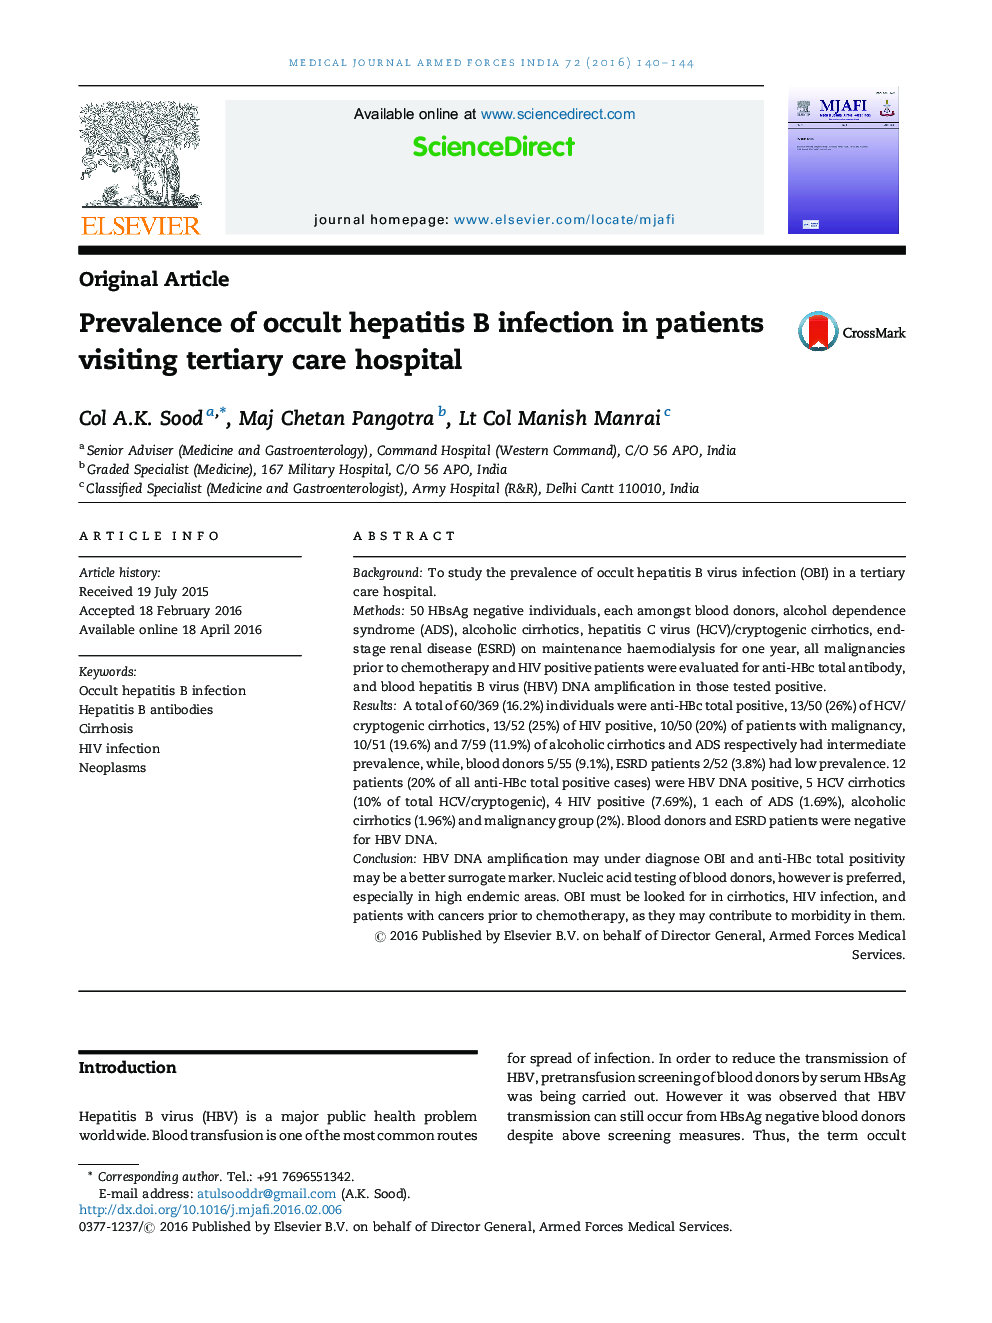 Prevalence of occult hepatitis B infection in patients visiting tertiary care hospital